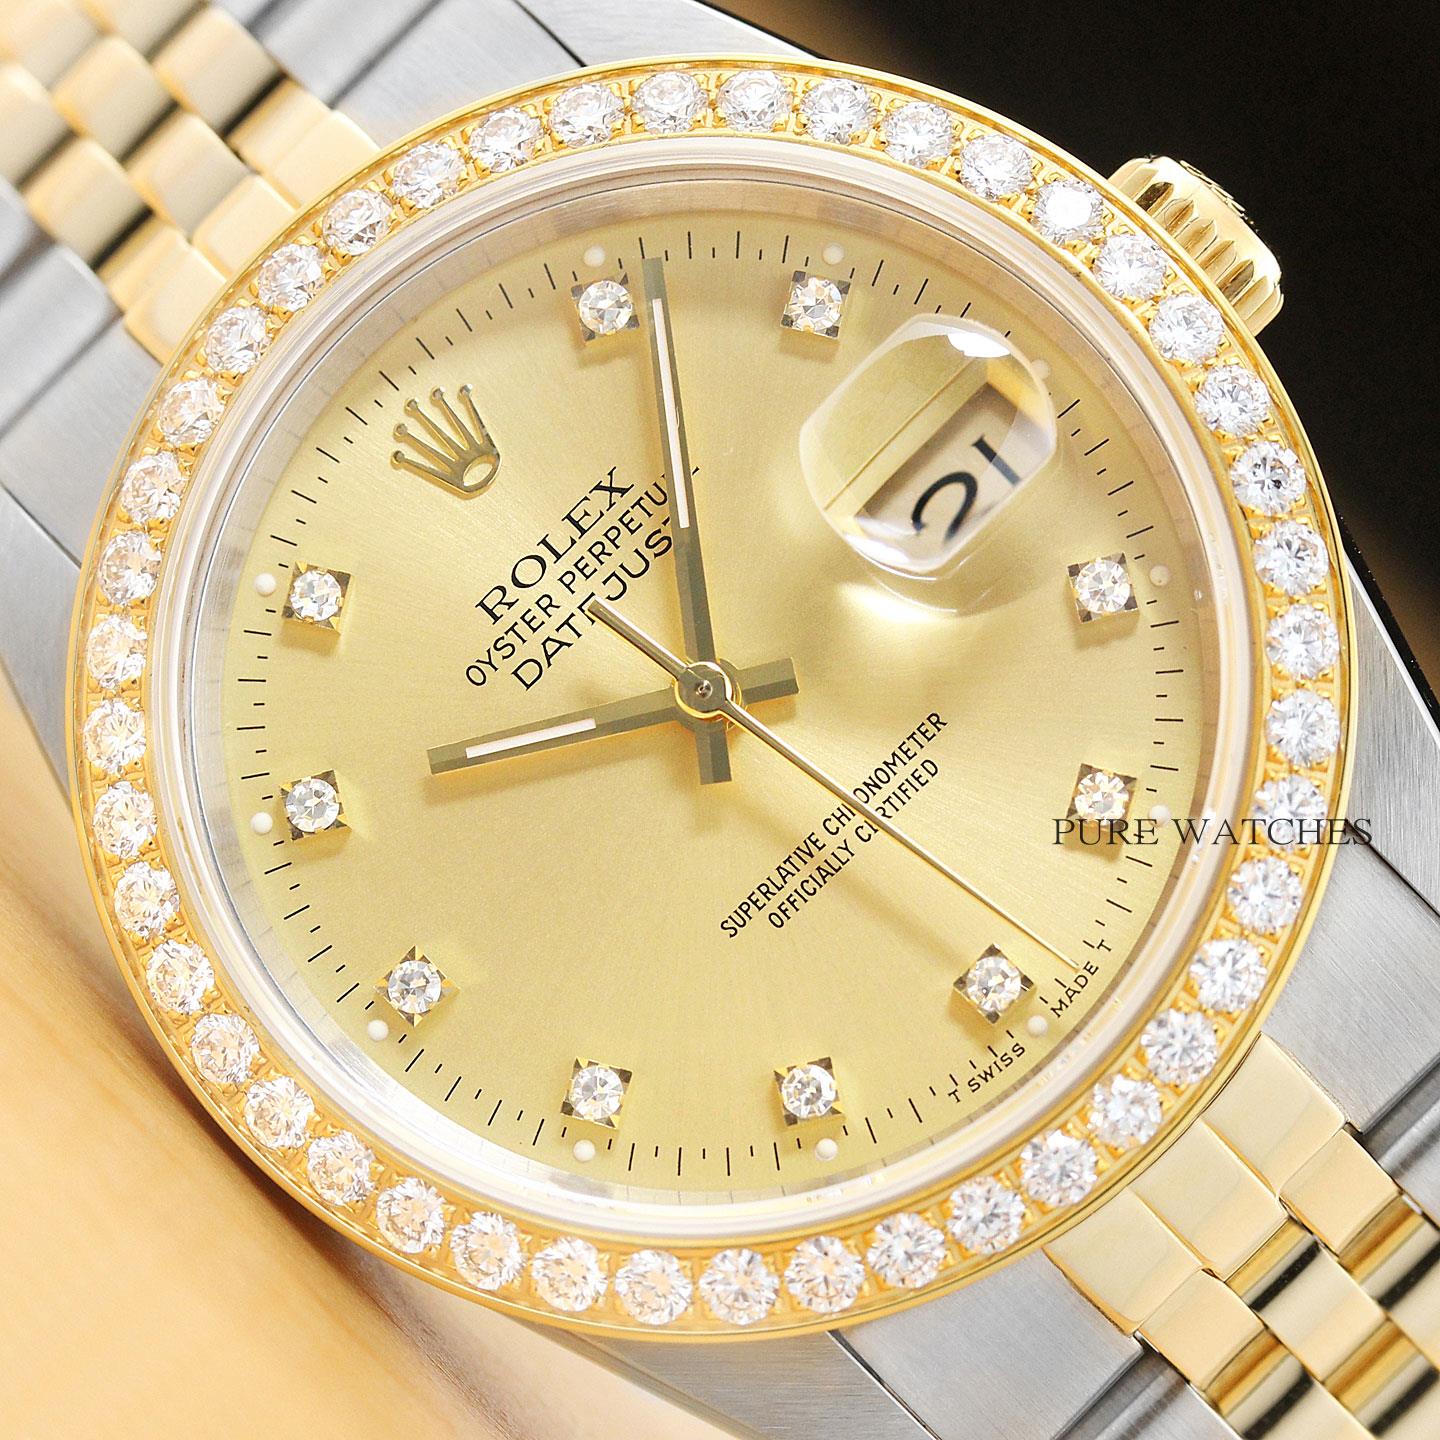 ROLEX MENS DATEJUST 16233 FACTORY DIAMOND DIAL TWO TONE WATCH + 1.60 CT ...